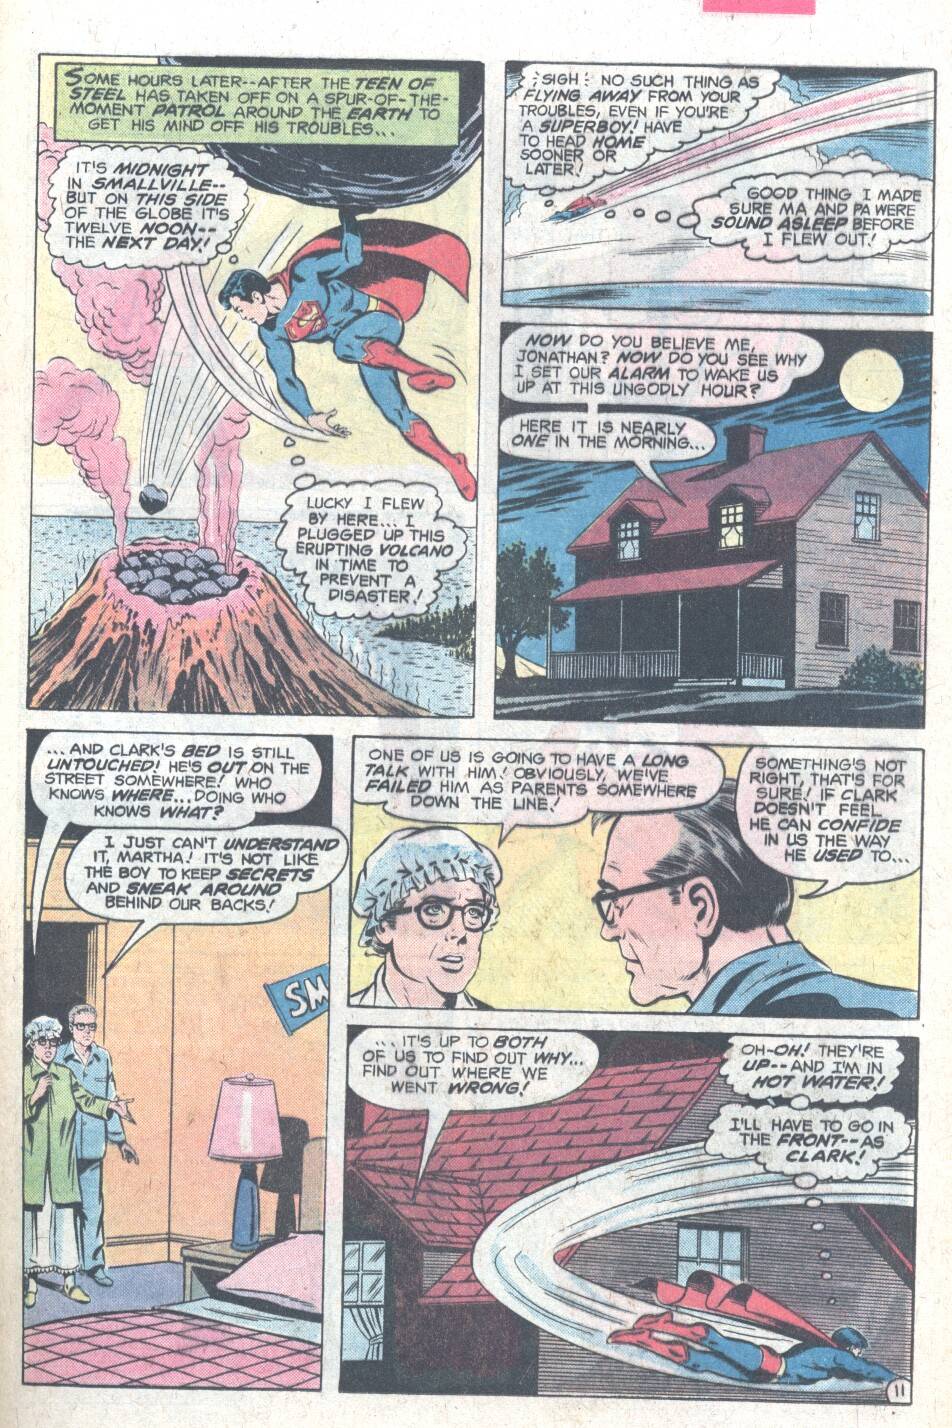 The New Adventures of Superboy 8 Page 11